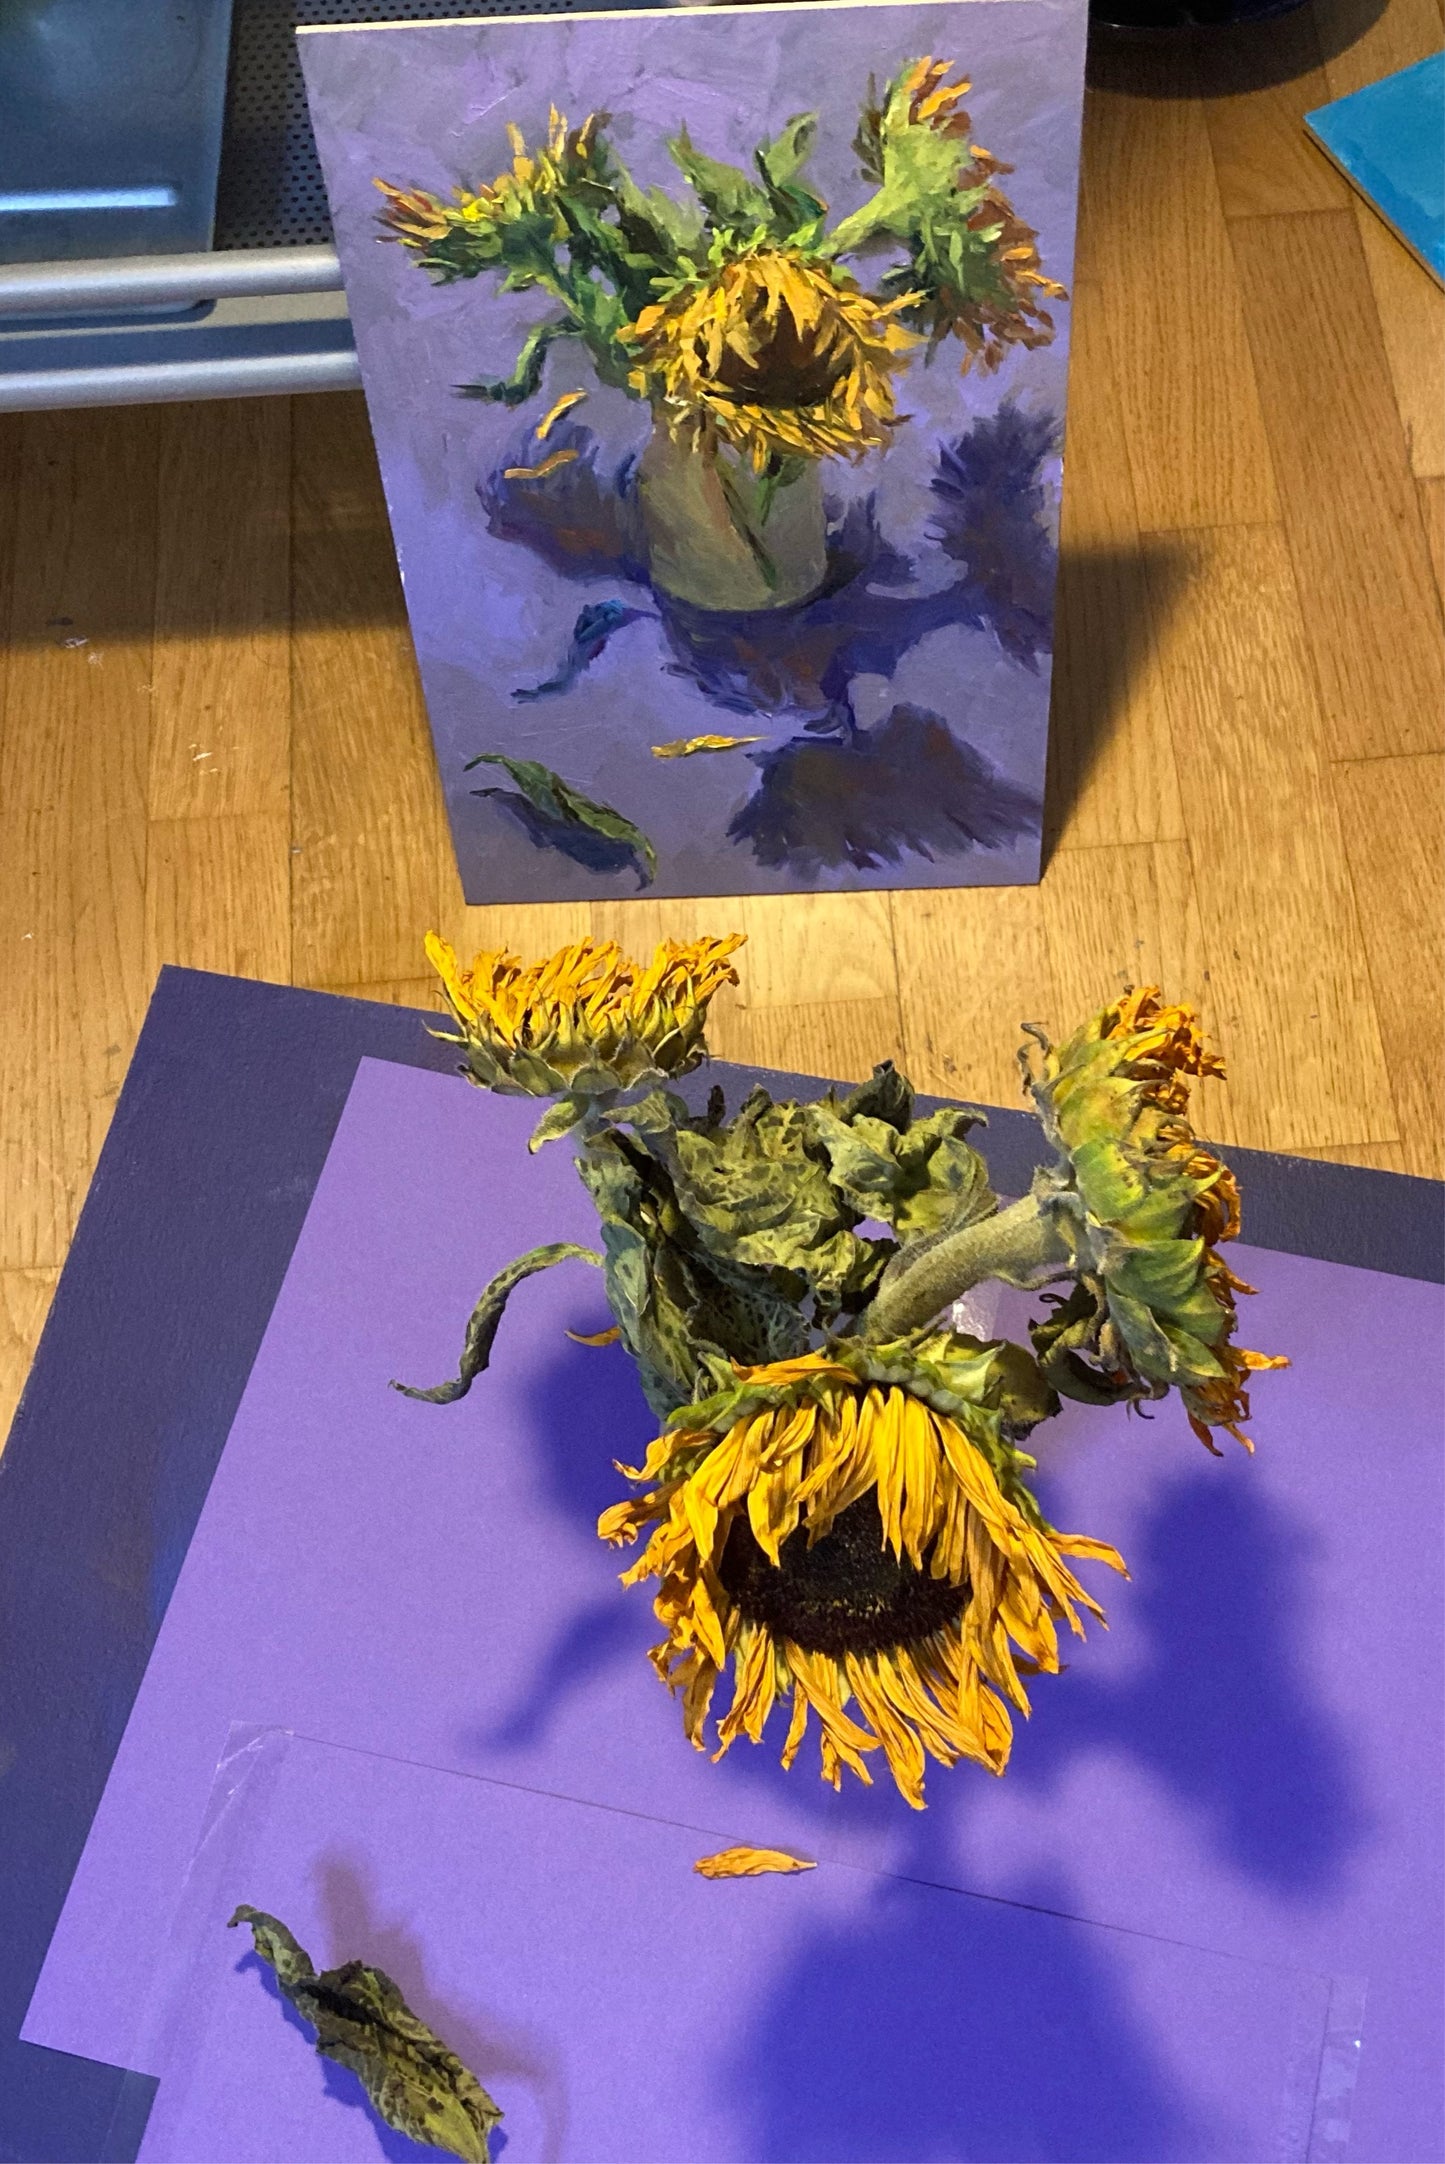 Sunflower Series 13 - Original Stilllife Painting, 8 by 12 inches